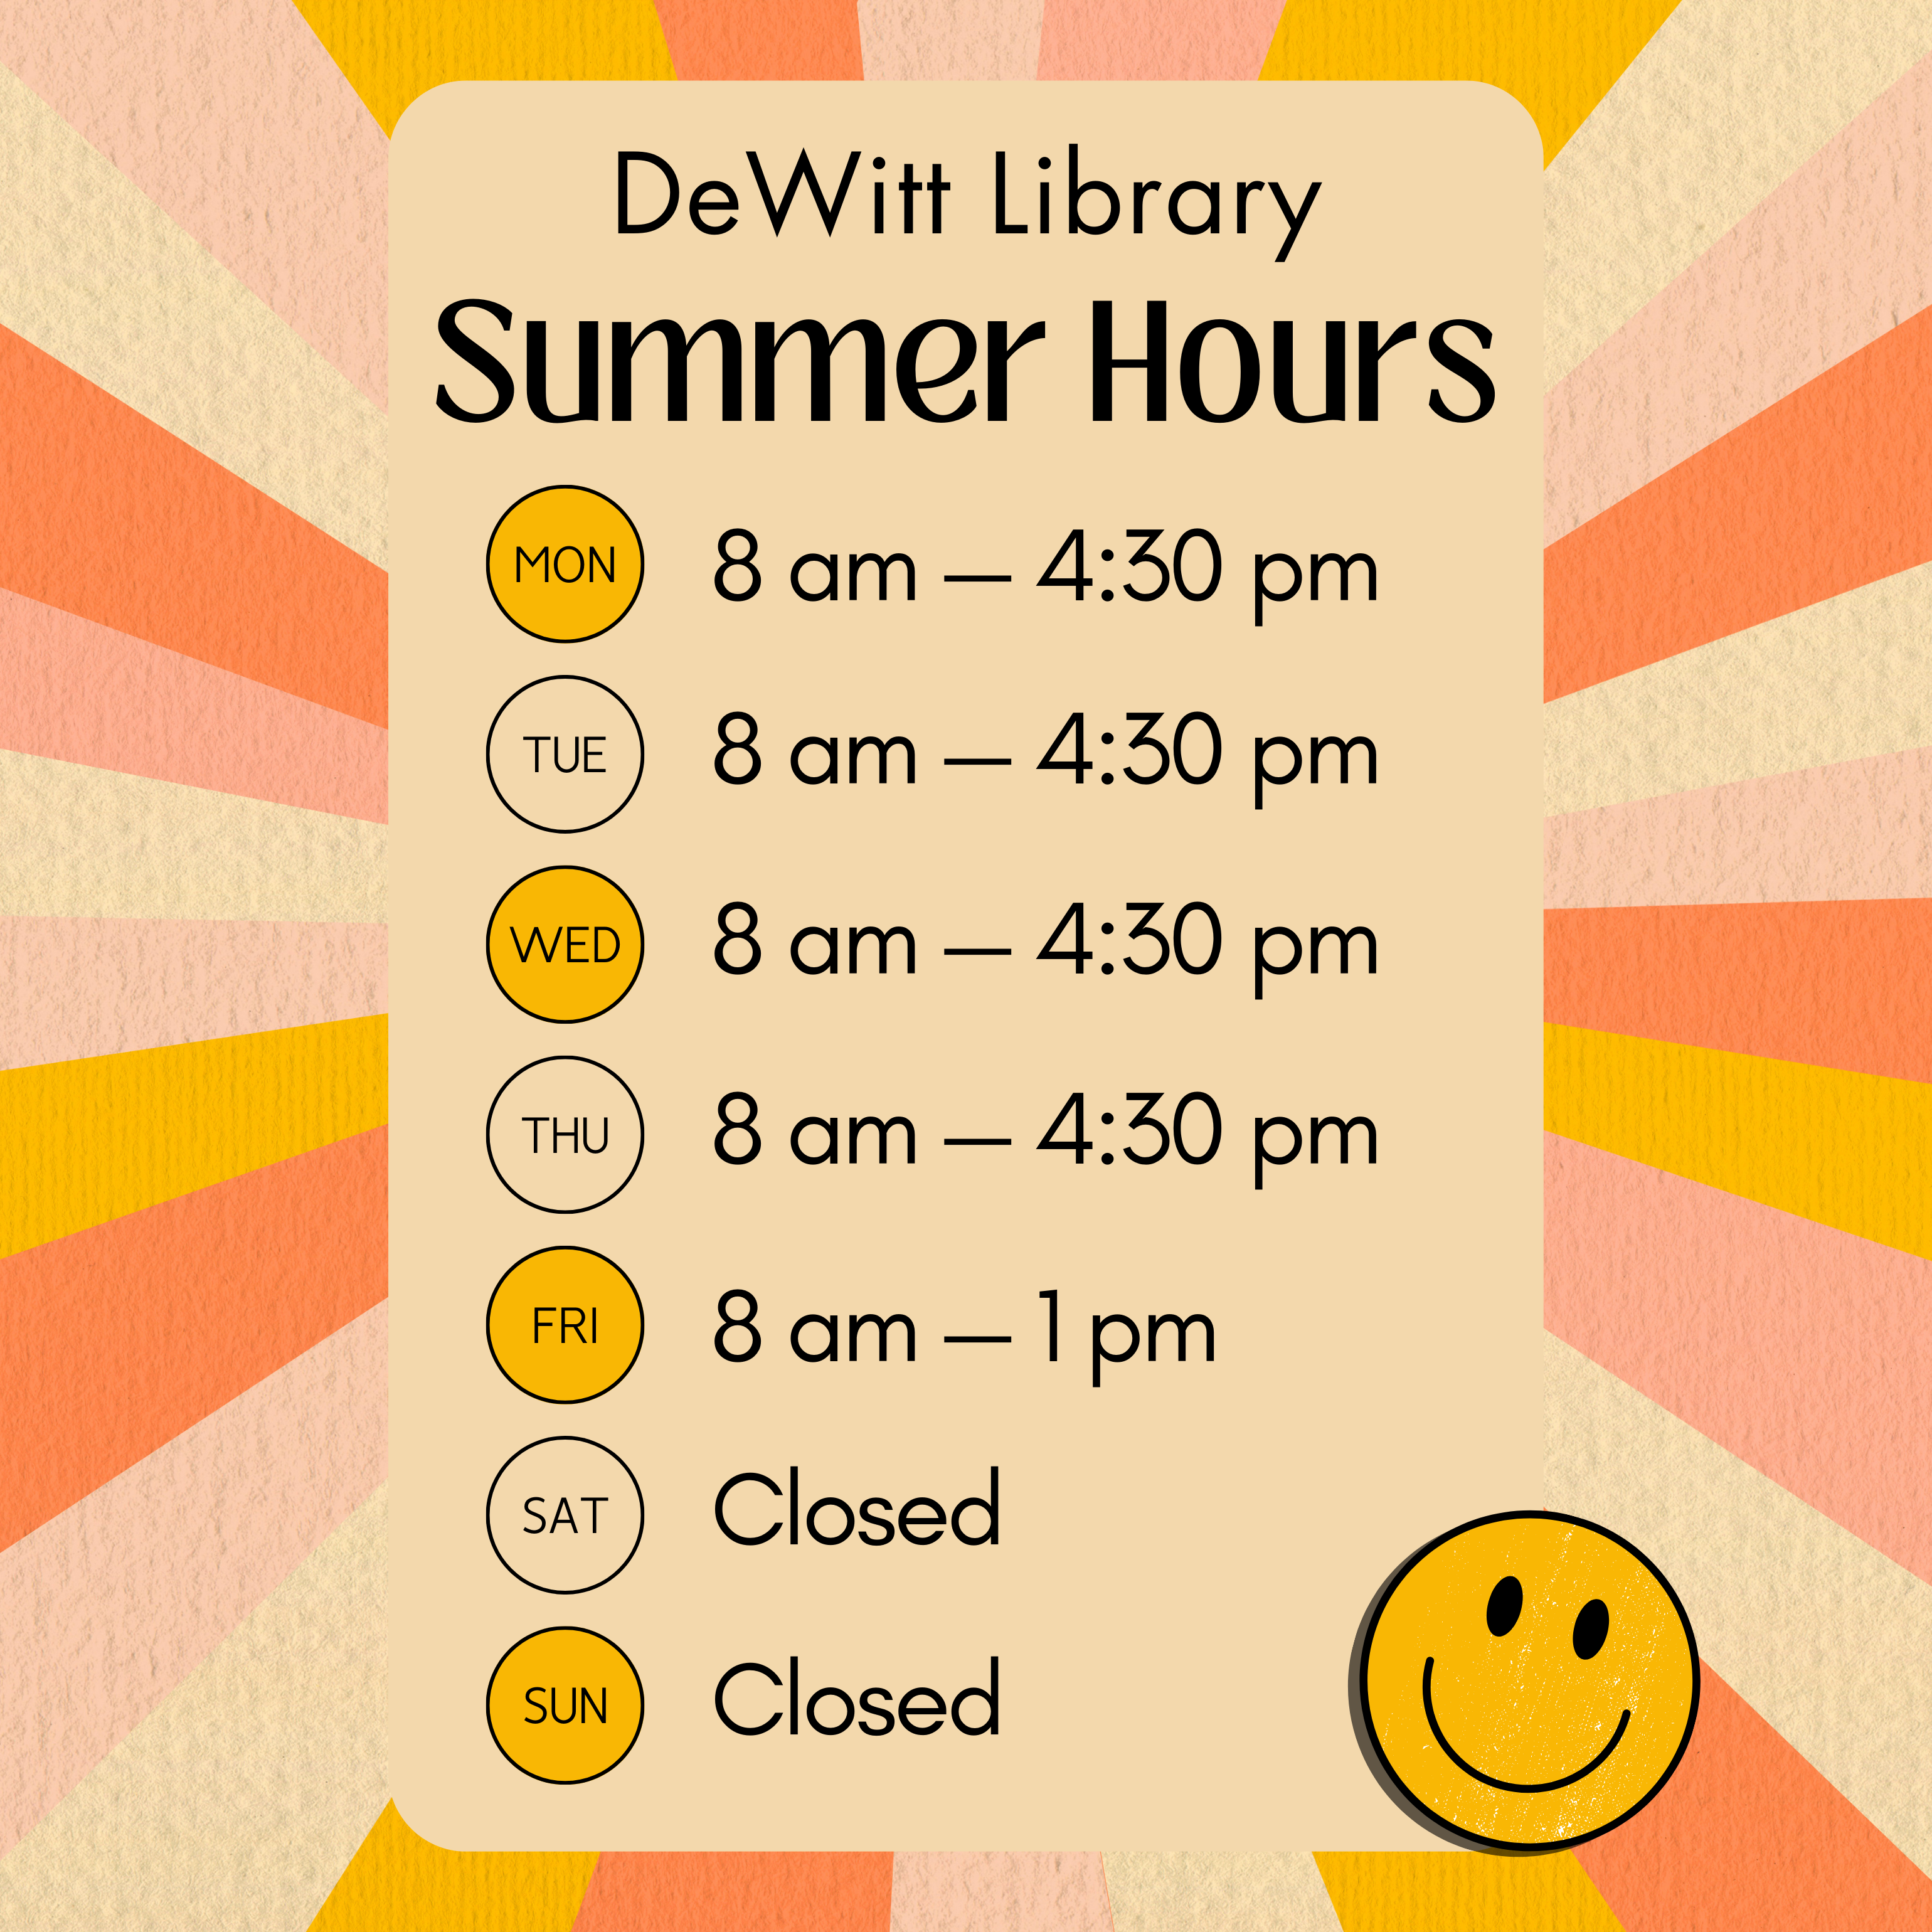 DeWitt Library Summer Hours Monday - Thursday: 8 am — 4:30 pm; Friday: 8 am — 1 pm; Saturday + Sunday: Closed.